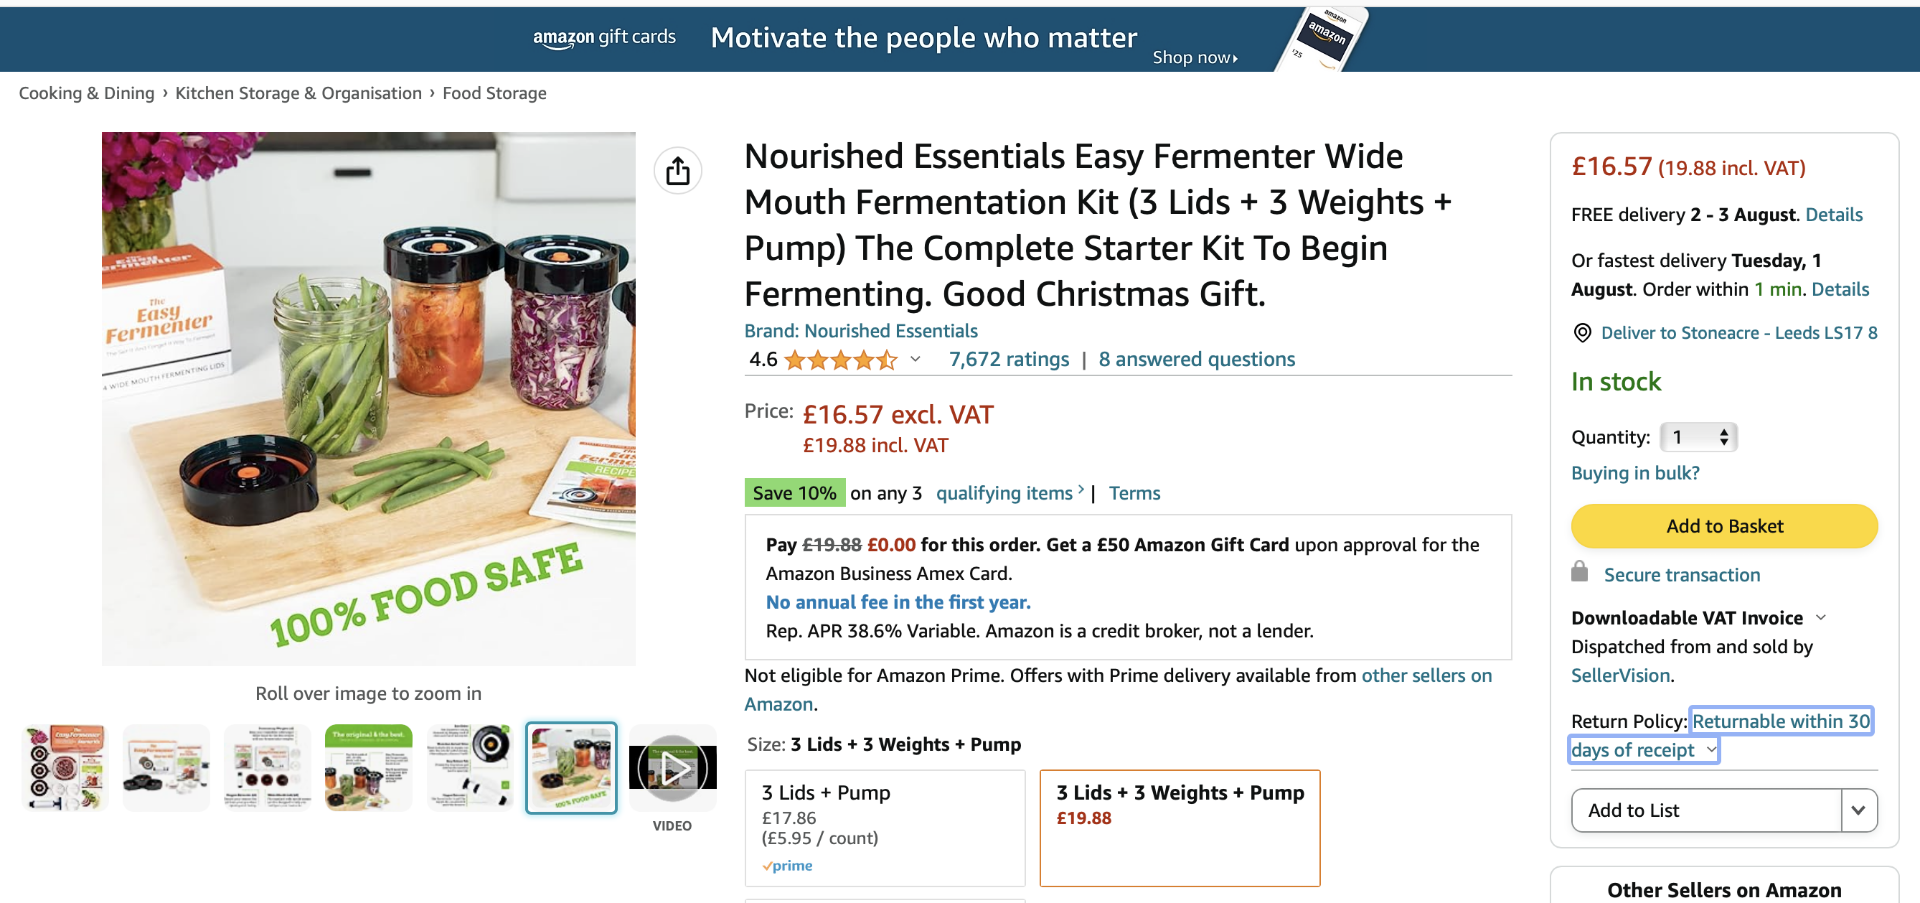 10 x Nourished Essentials Easy Fermenter Wide Mouth Fermentation Kit (3 Lids + 3 Weights + Pump) The - Image 2 of 5